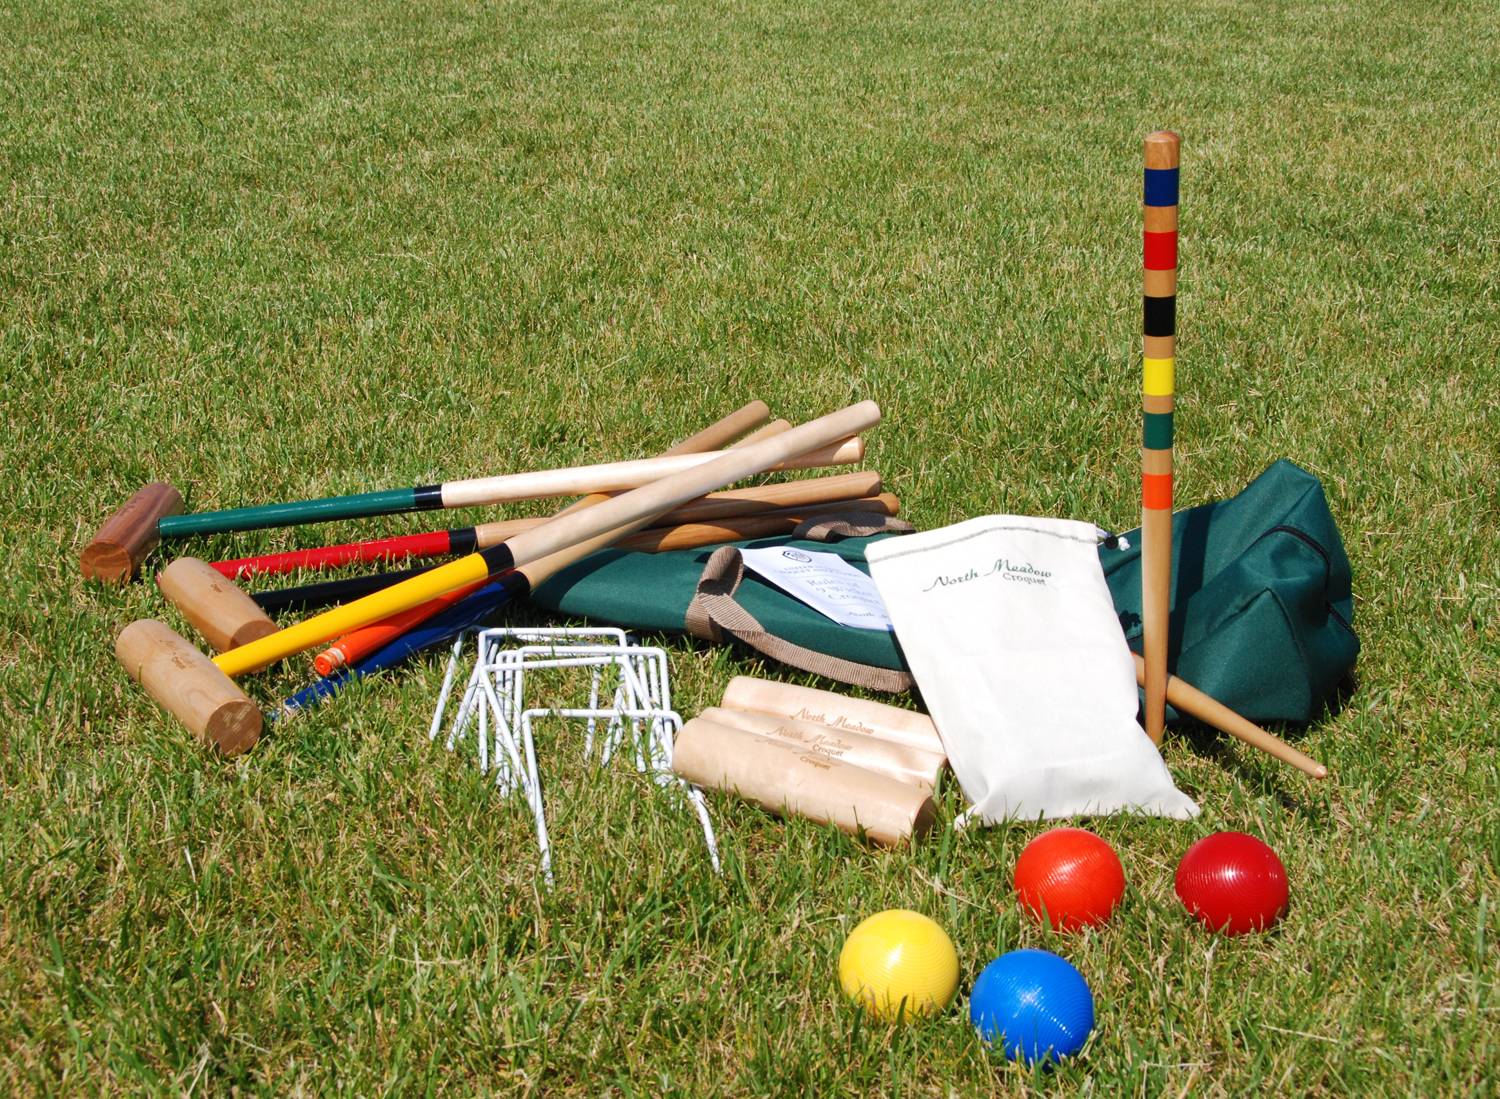 North Meadow Scottsdale Personalized 6-Player Croquet Set